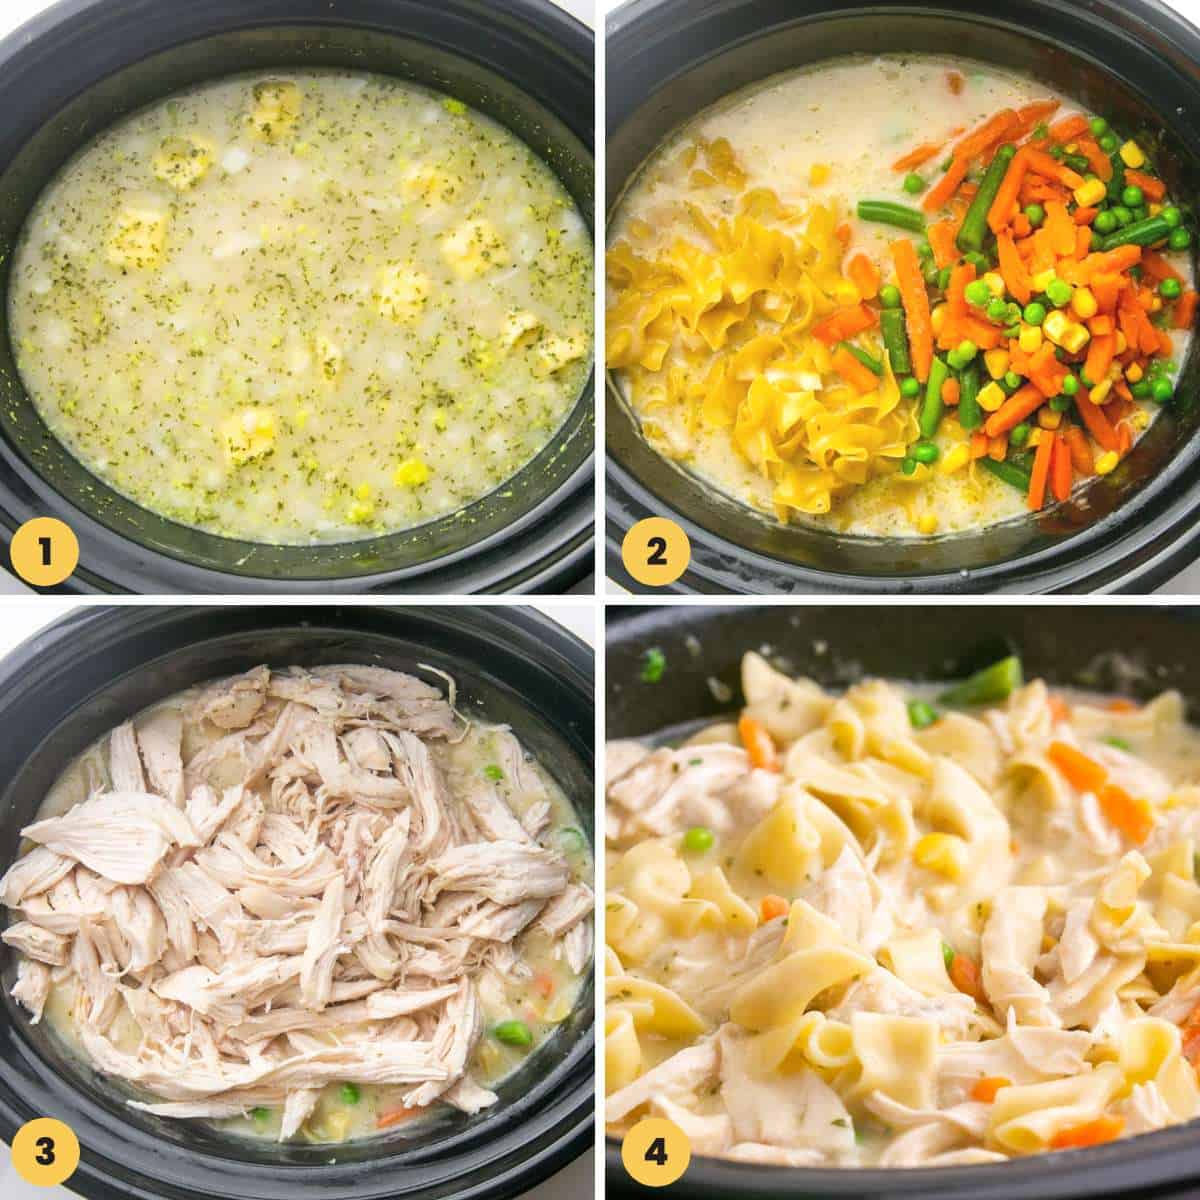 A collage of four images showing how to make crockpot chicken and noodles in a slow cooker.